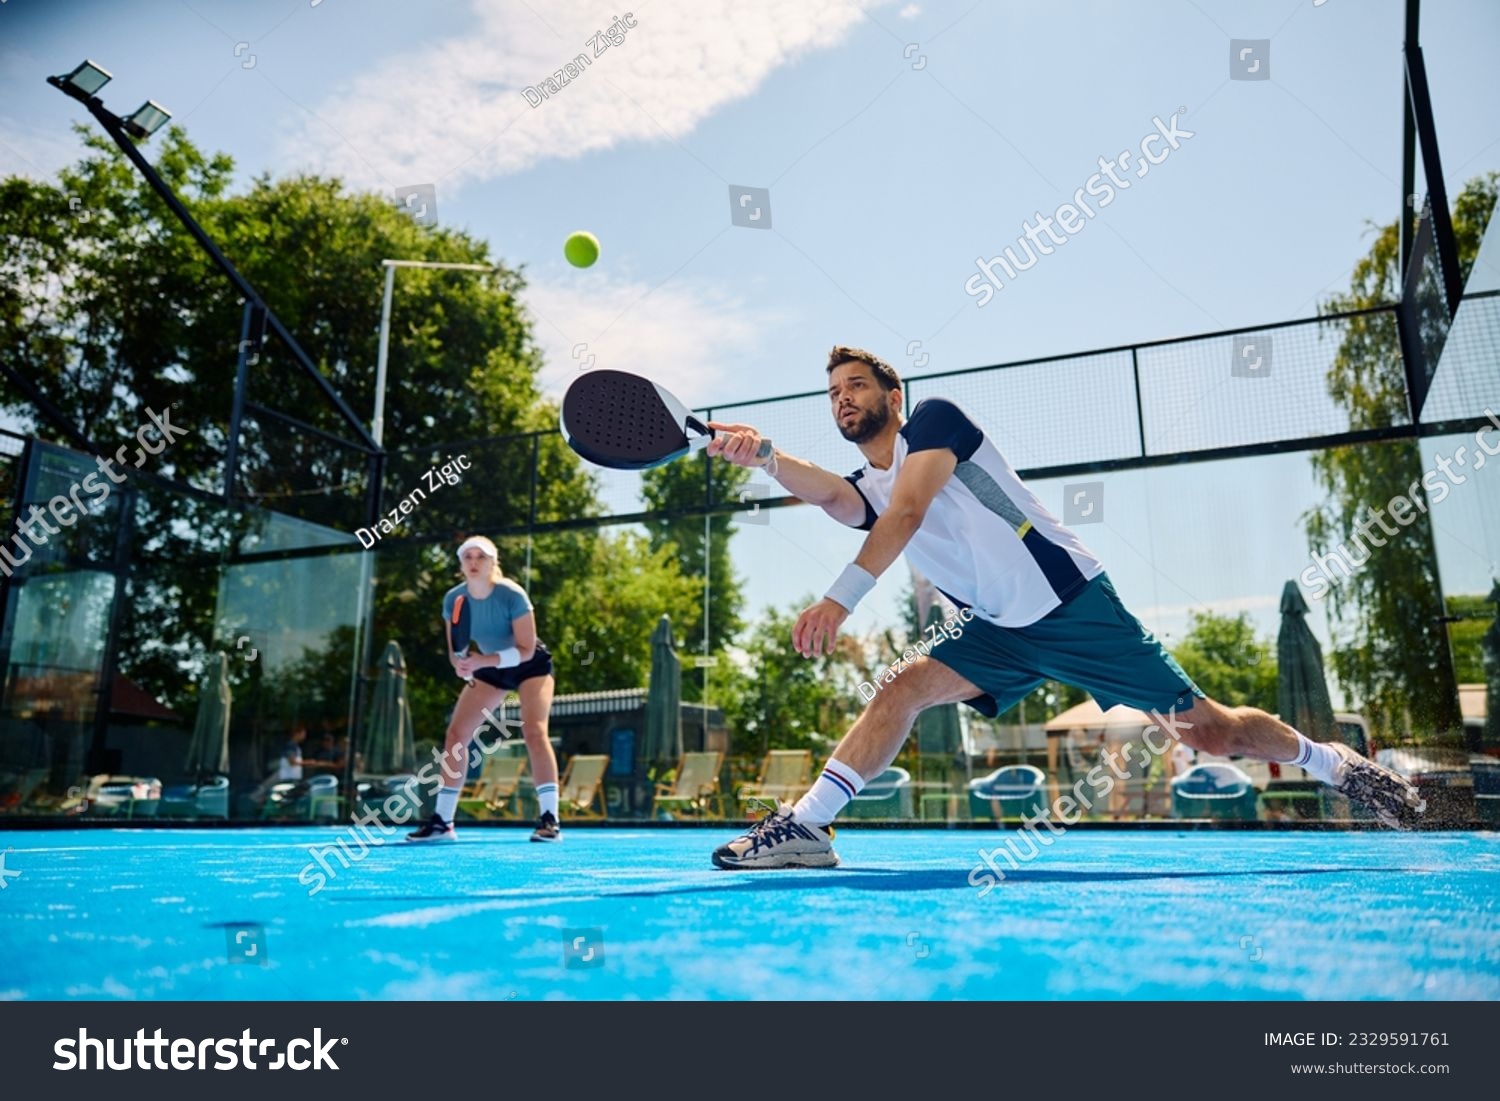 Young athlete playing padel in mixed doubles on outdoor court. Copy space. #2329591761